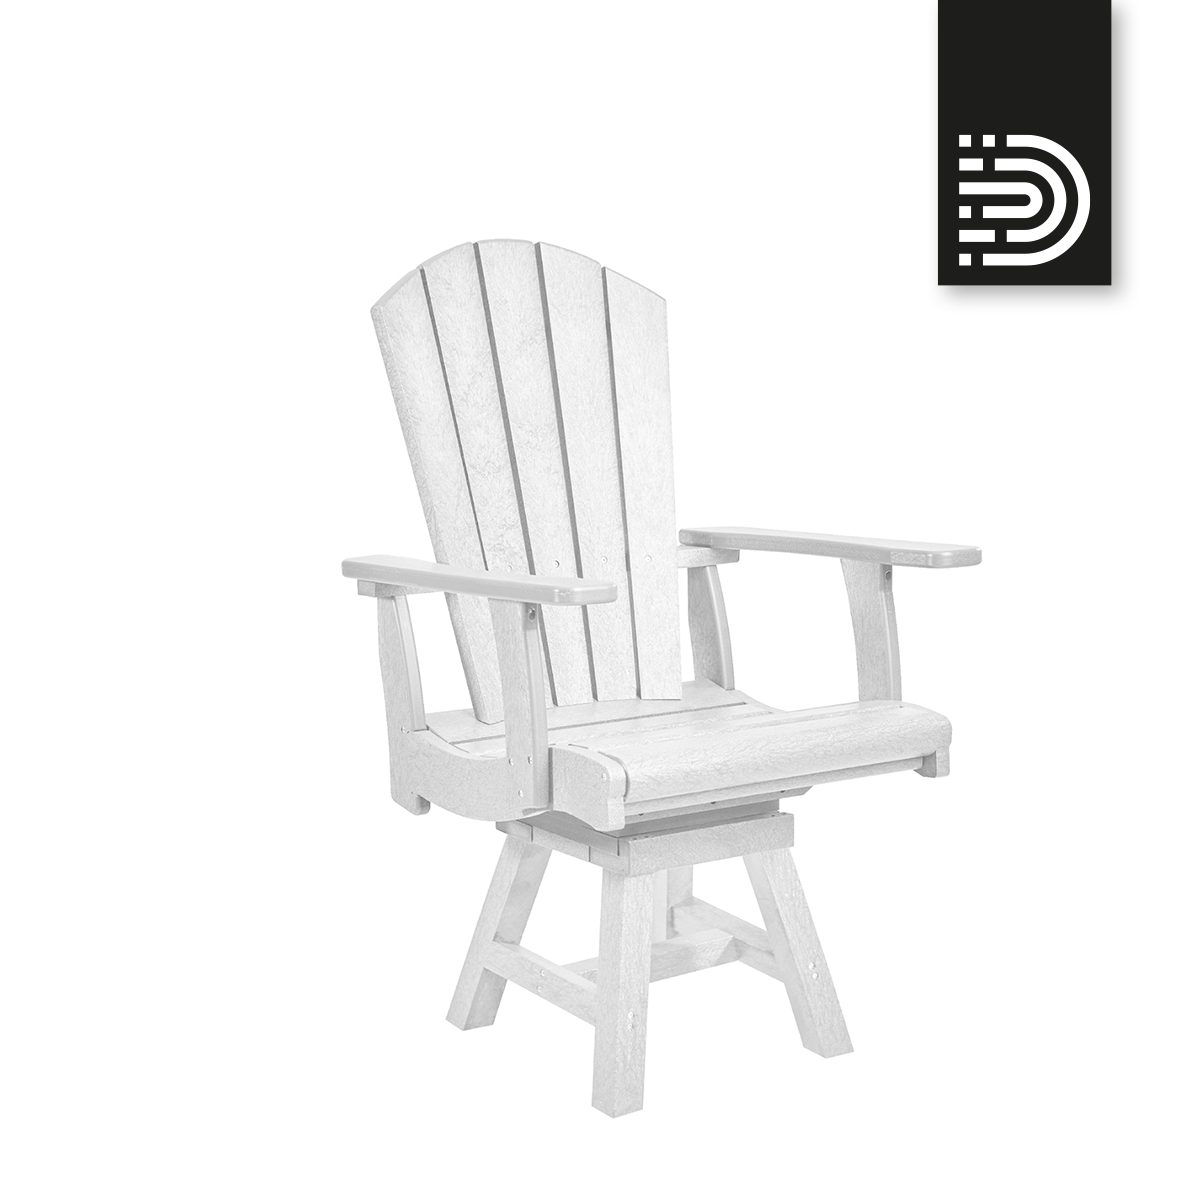 C16 Addy Dining Arm Chair - white 02